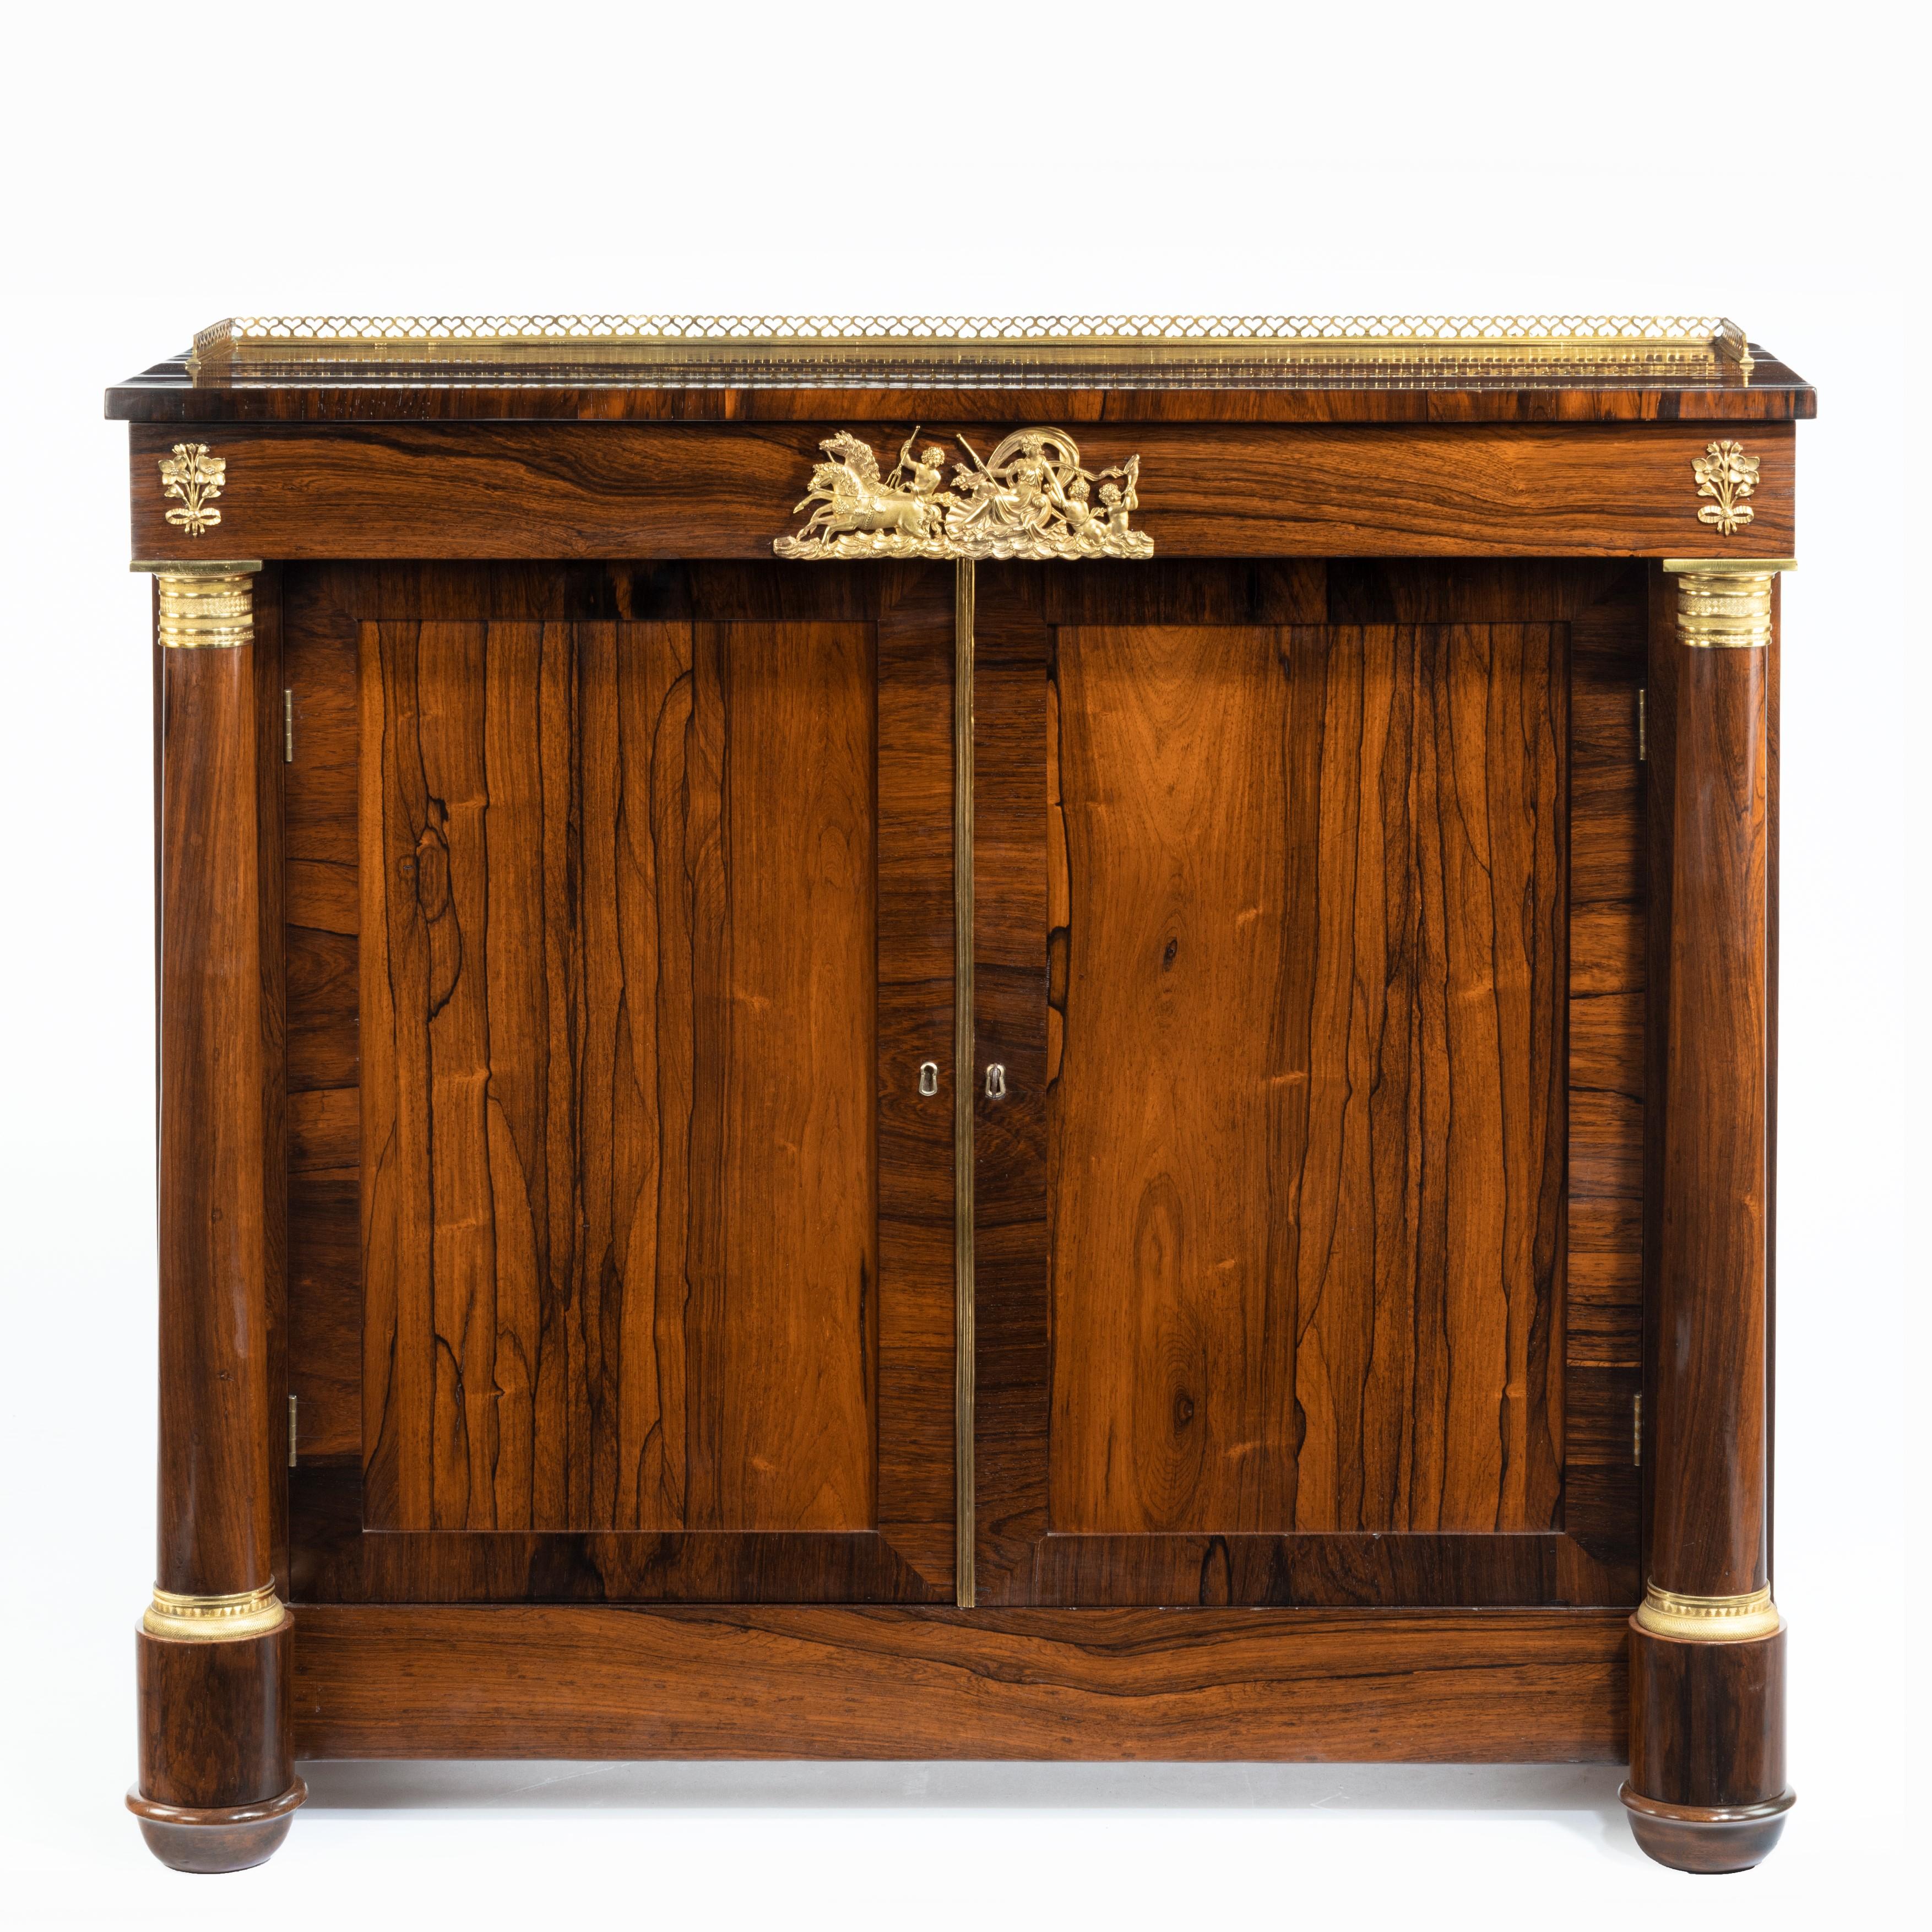 Pair of late Regency rosewood side cabinets, in the French Empire style, each of rectangular form with a disguised frieze drawer and brass gallery above cupboard doors between two tapering pillars, with ormolu mounts depicting the sun-god Apollo in